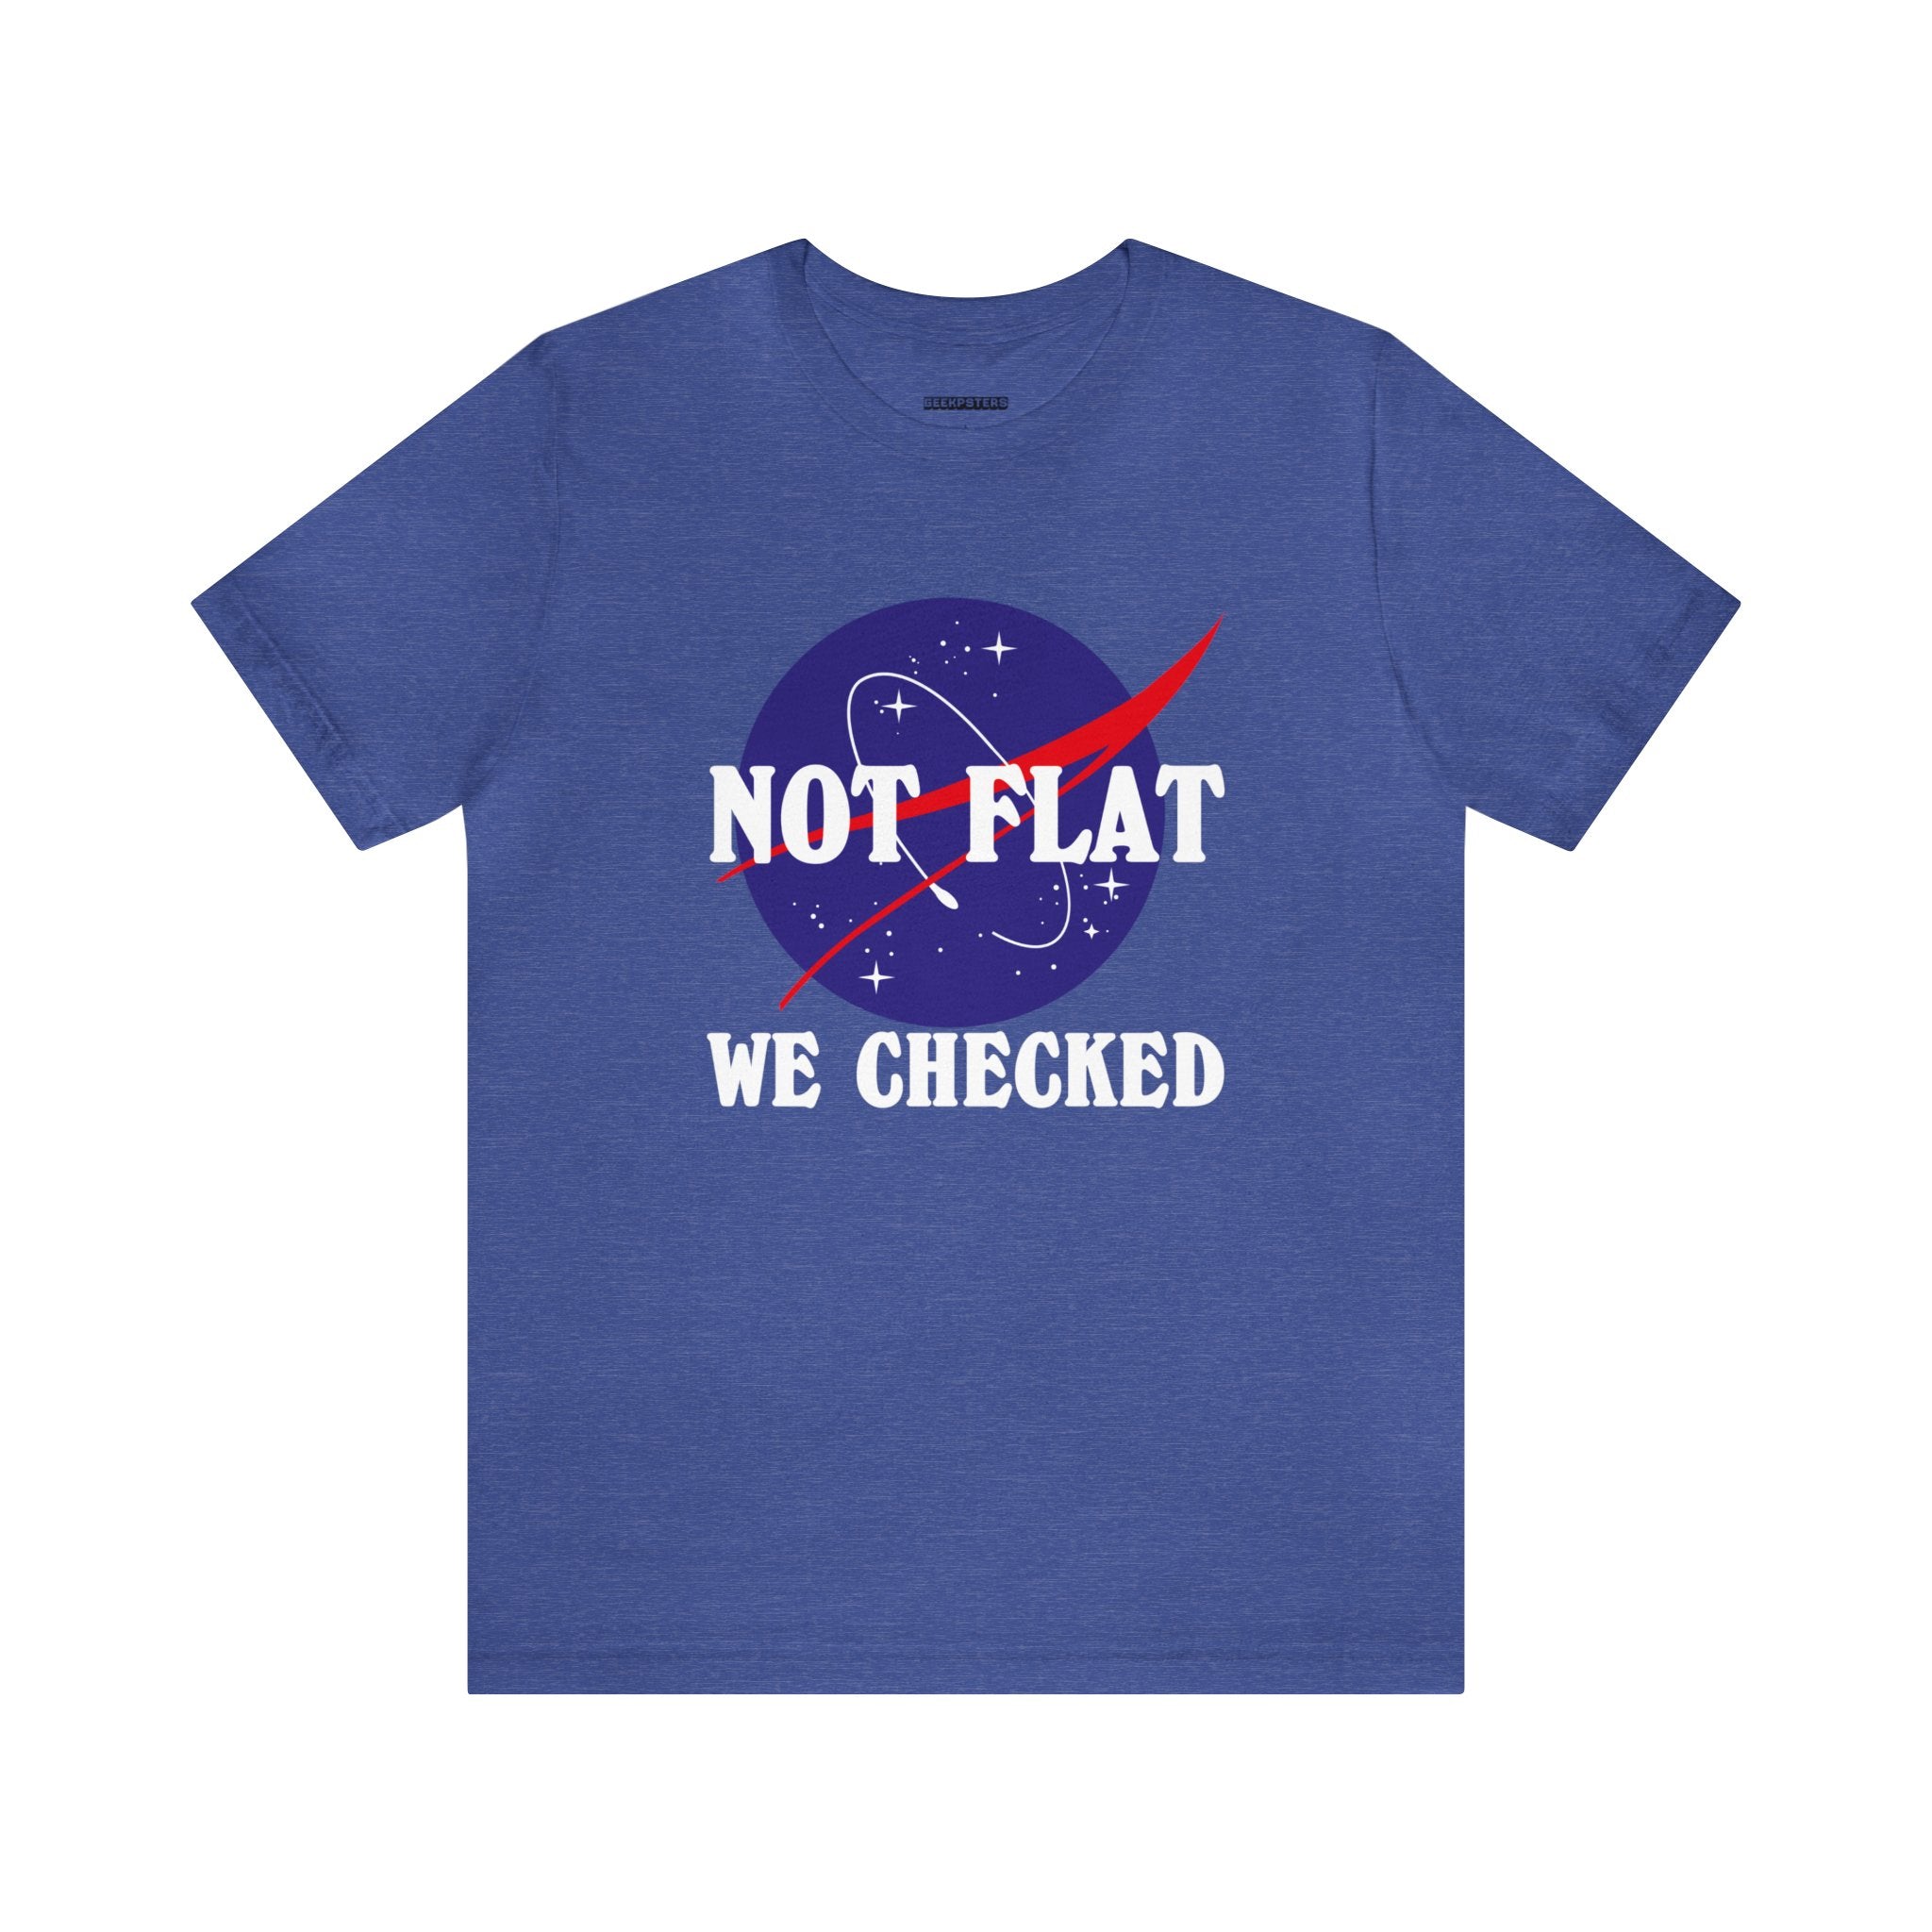 We checked an Earth Not Flat T- Shirt specifically designed for science enthusiasts who are fascinated by the Earth.